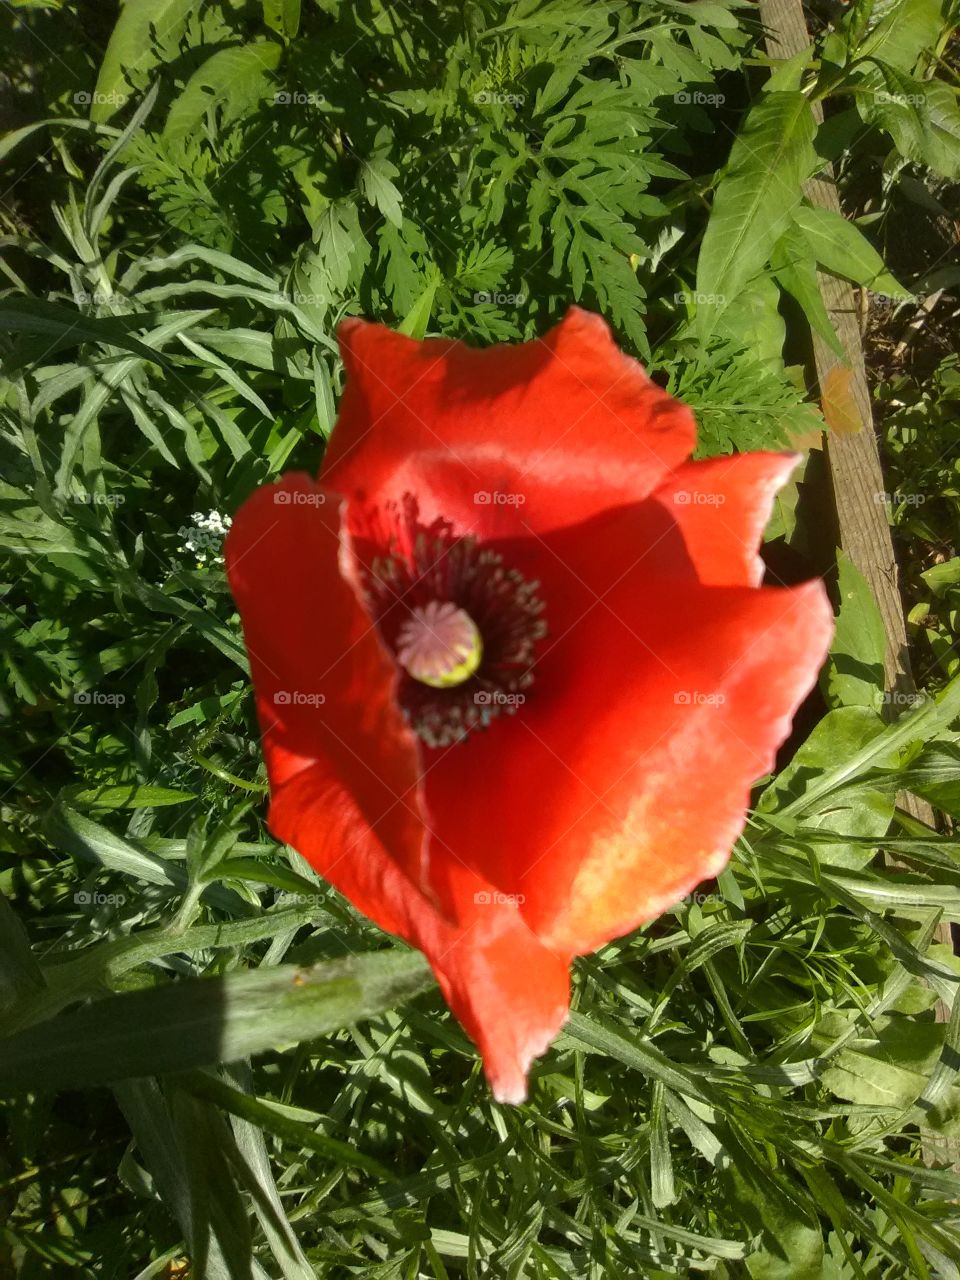 this is from my organic flower garden it's a poppy flower it's so very pretty and really brightened my day .